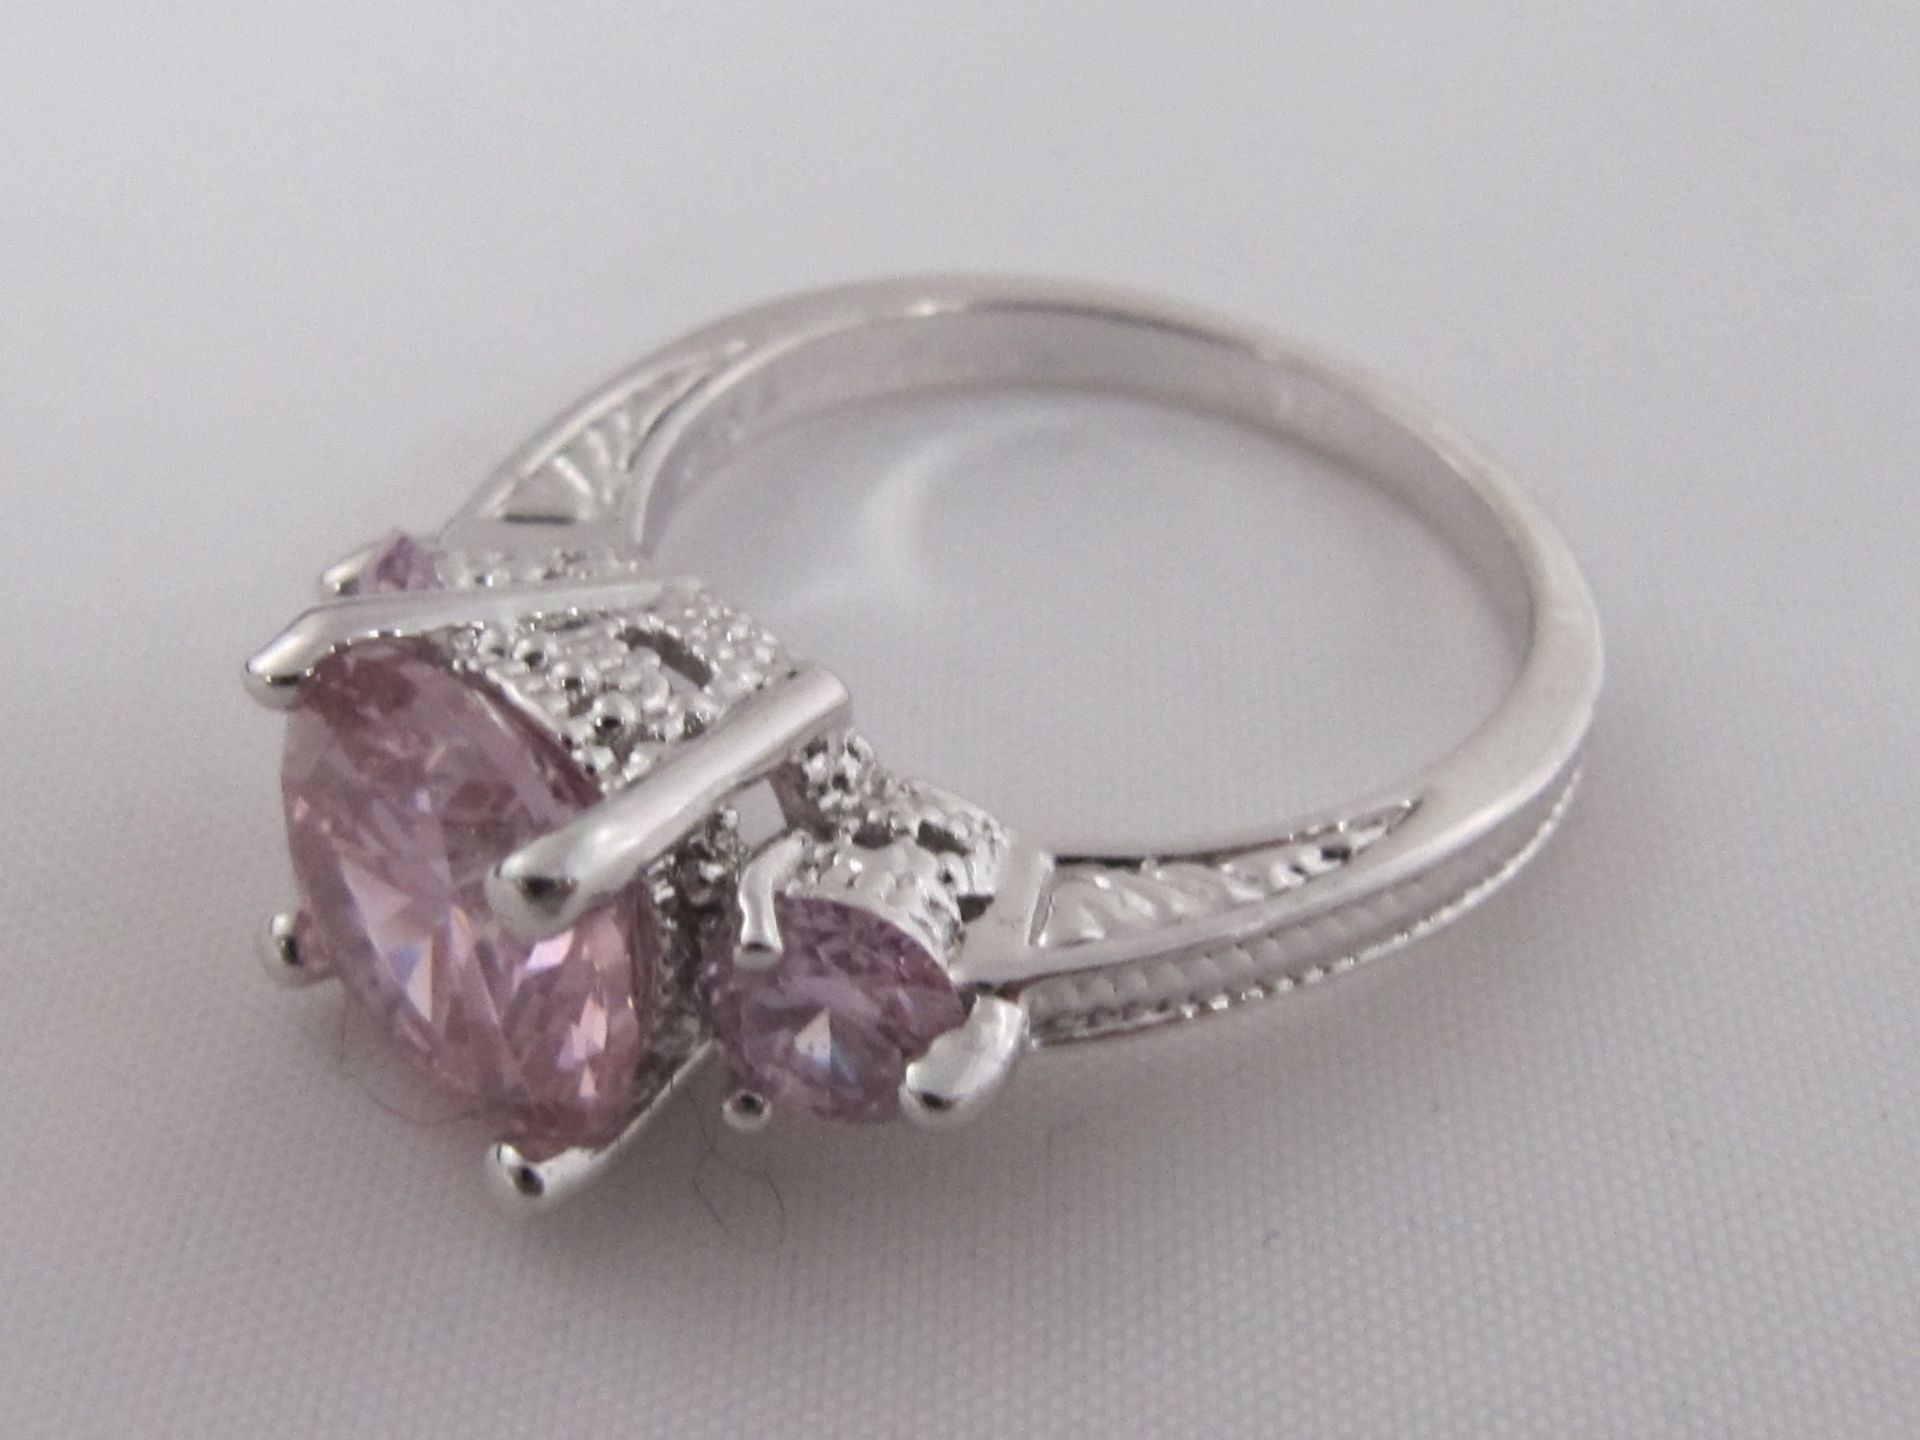 10k White Gold Filled with Pink Sapphires. Size P.